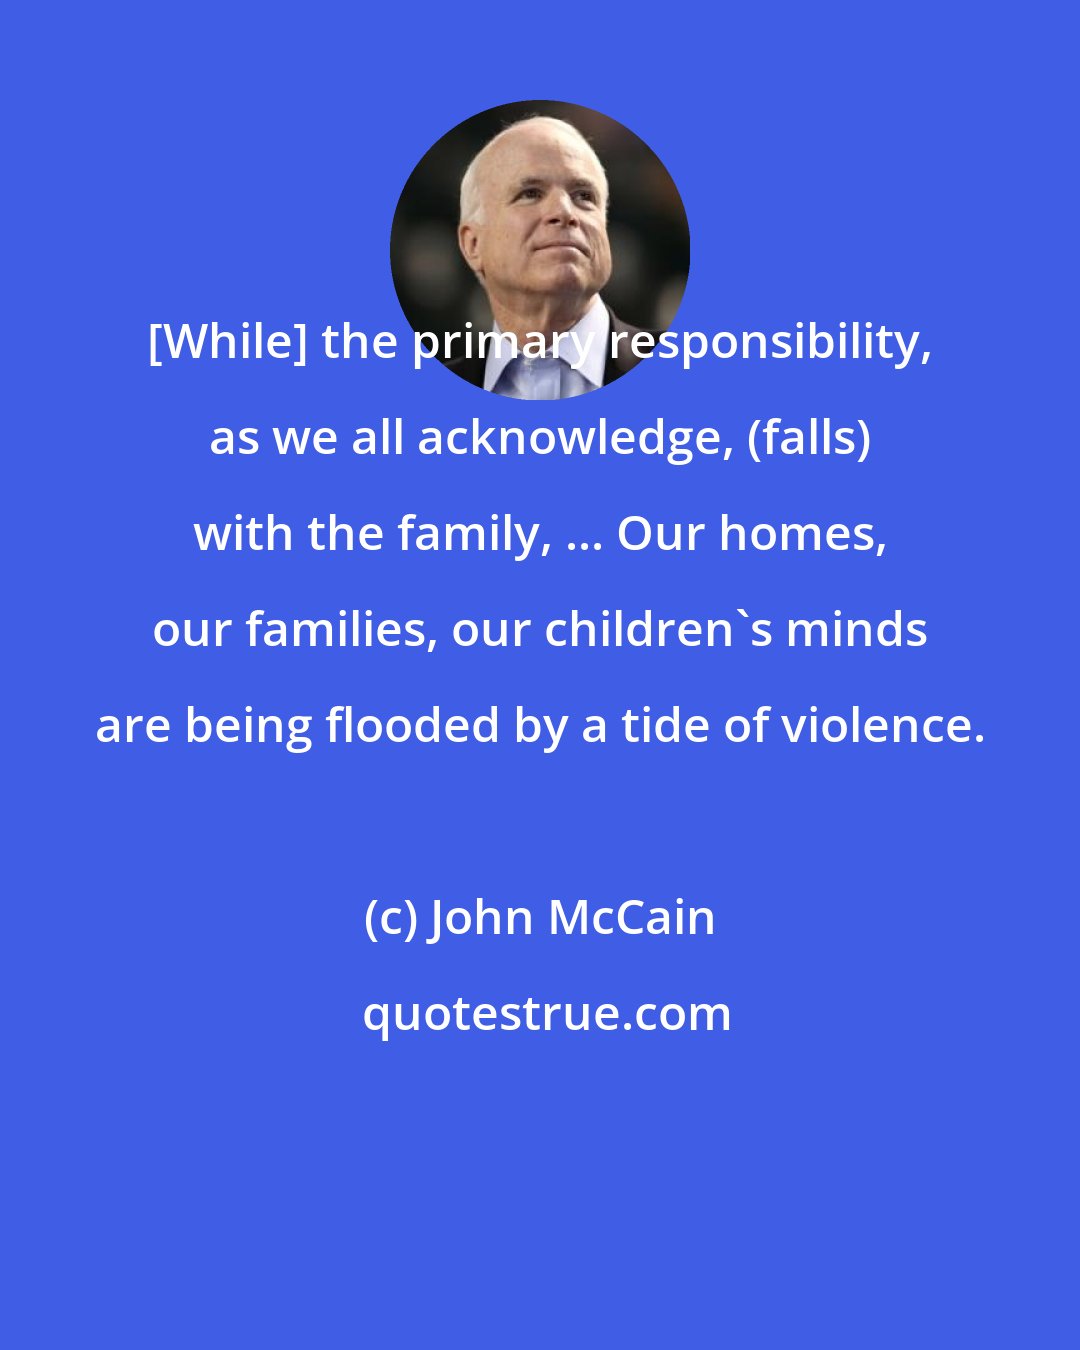 John McCain: [While] the primary responsibility, as we all acknowledge, (falls) with the family, ... Our homes, our families, our children's minds are being flooded by a tide of violence.